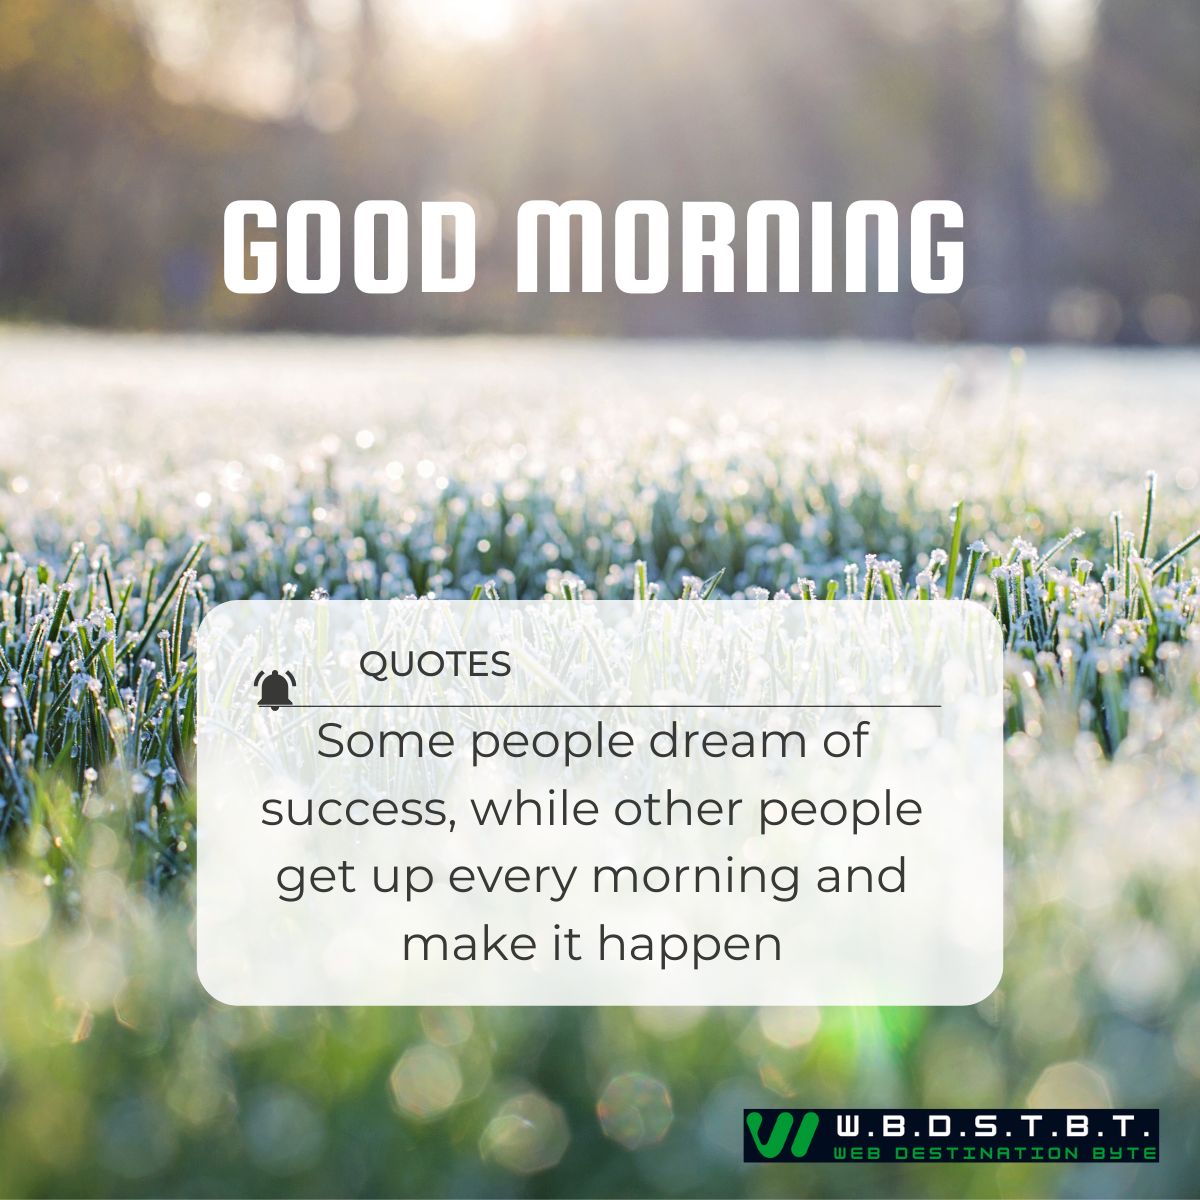 Some people dream of success, while other people get up every morning and make it happen